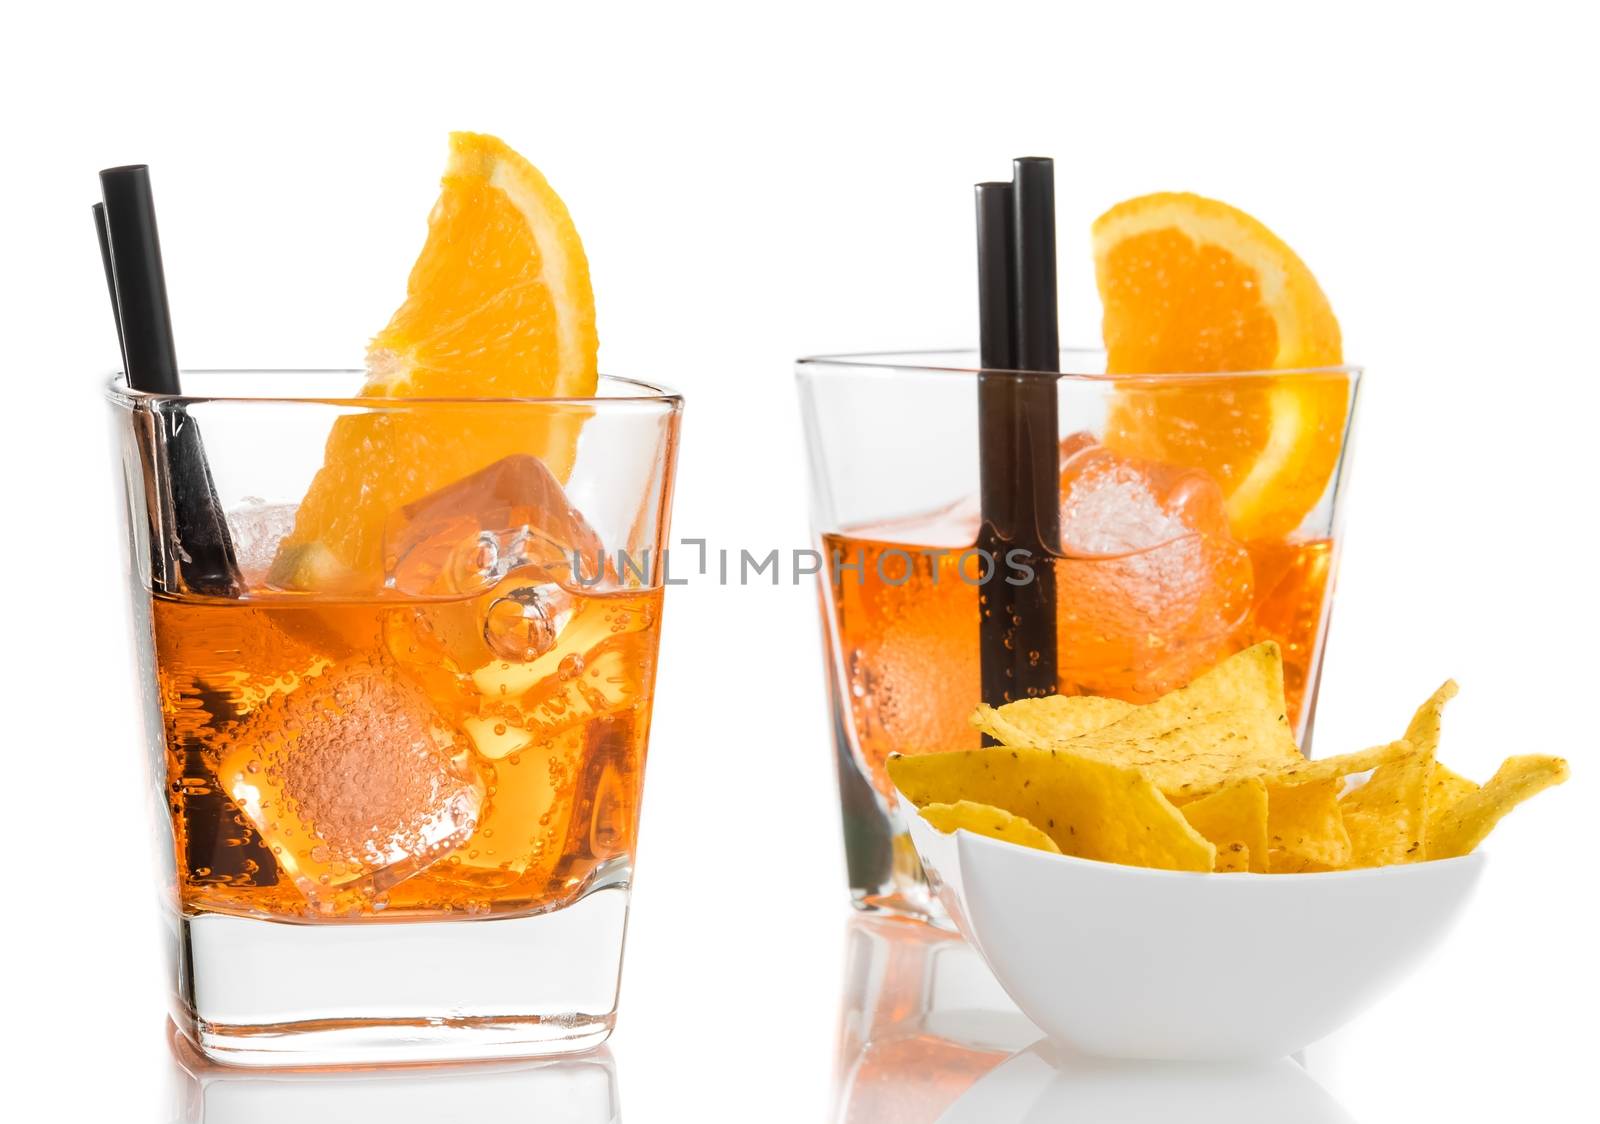 glasses of spritz aperitif aperol cocktail with orange slices and ice cubes near tacos chips on white table background